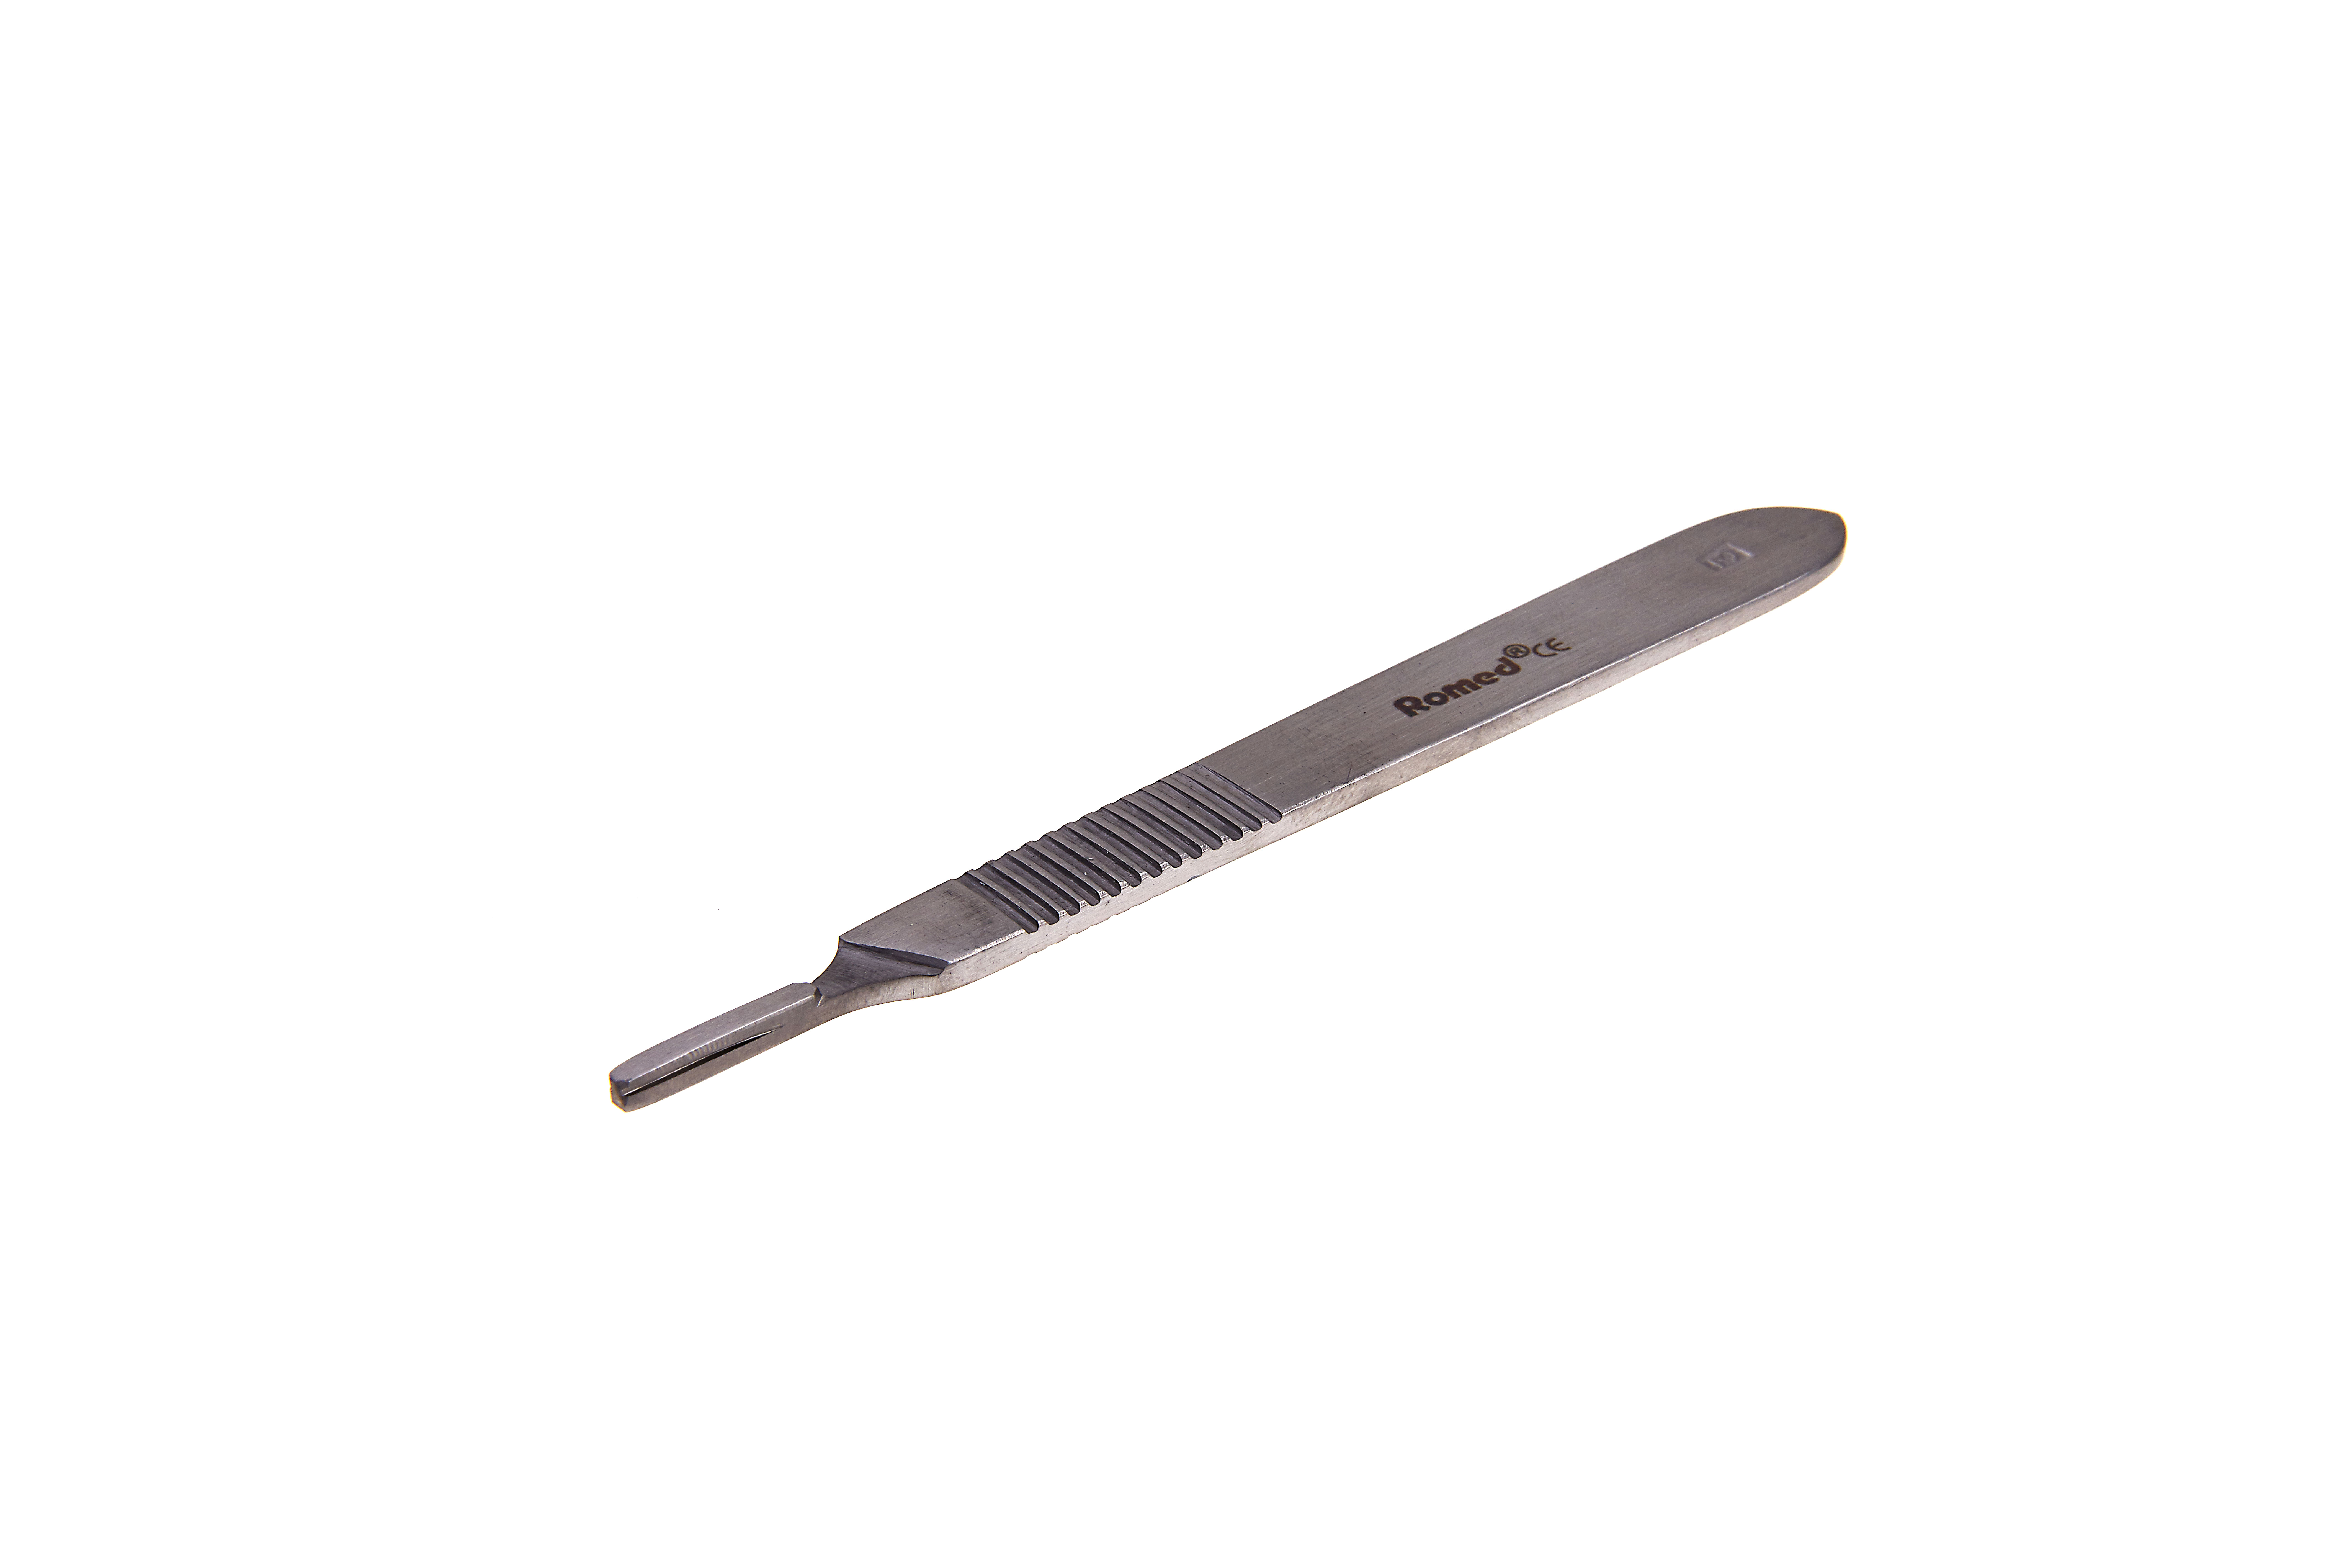 HANDLE-3 Manches pour scalpels Romed, n° 3 : fi g. 10/11/12/15/18, 50 unités par carton, n° 4 : fi g. 20/21/22/23/24, 50 unités par carton.